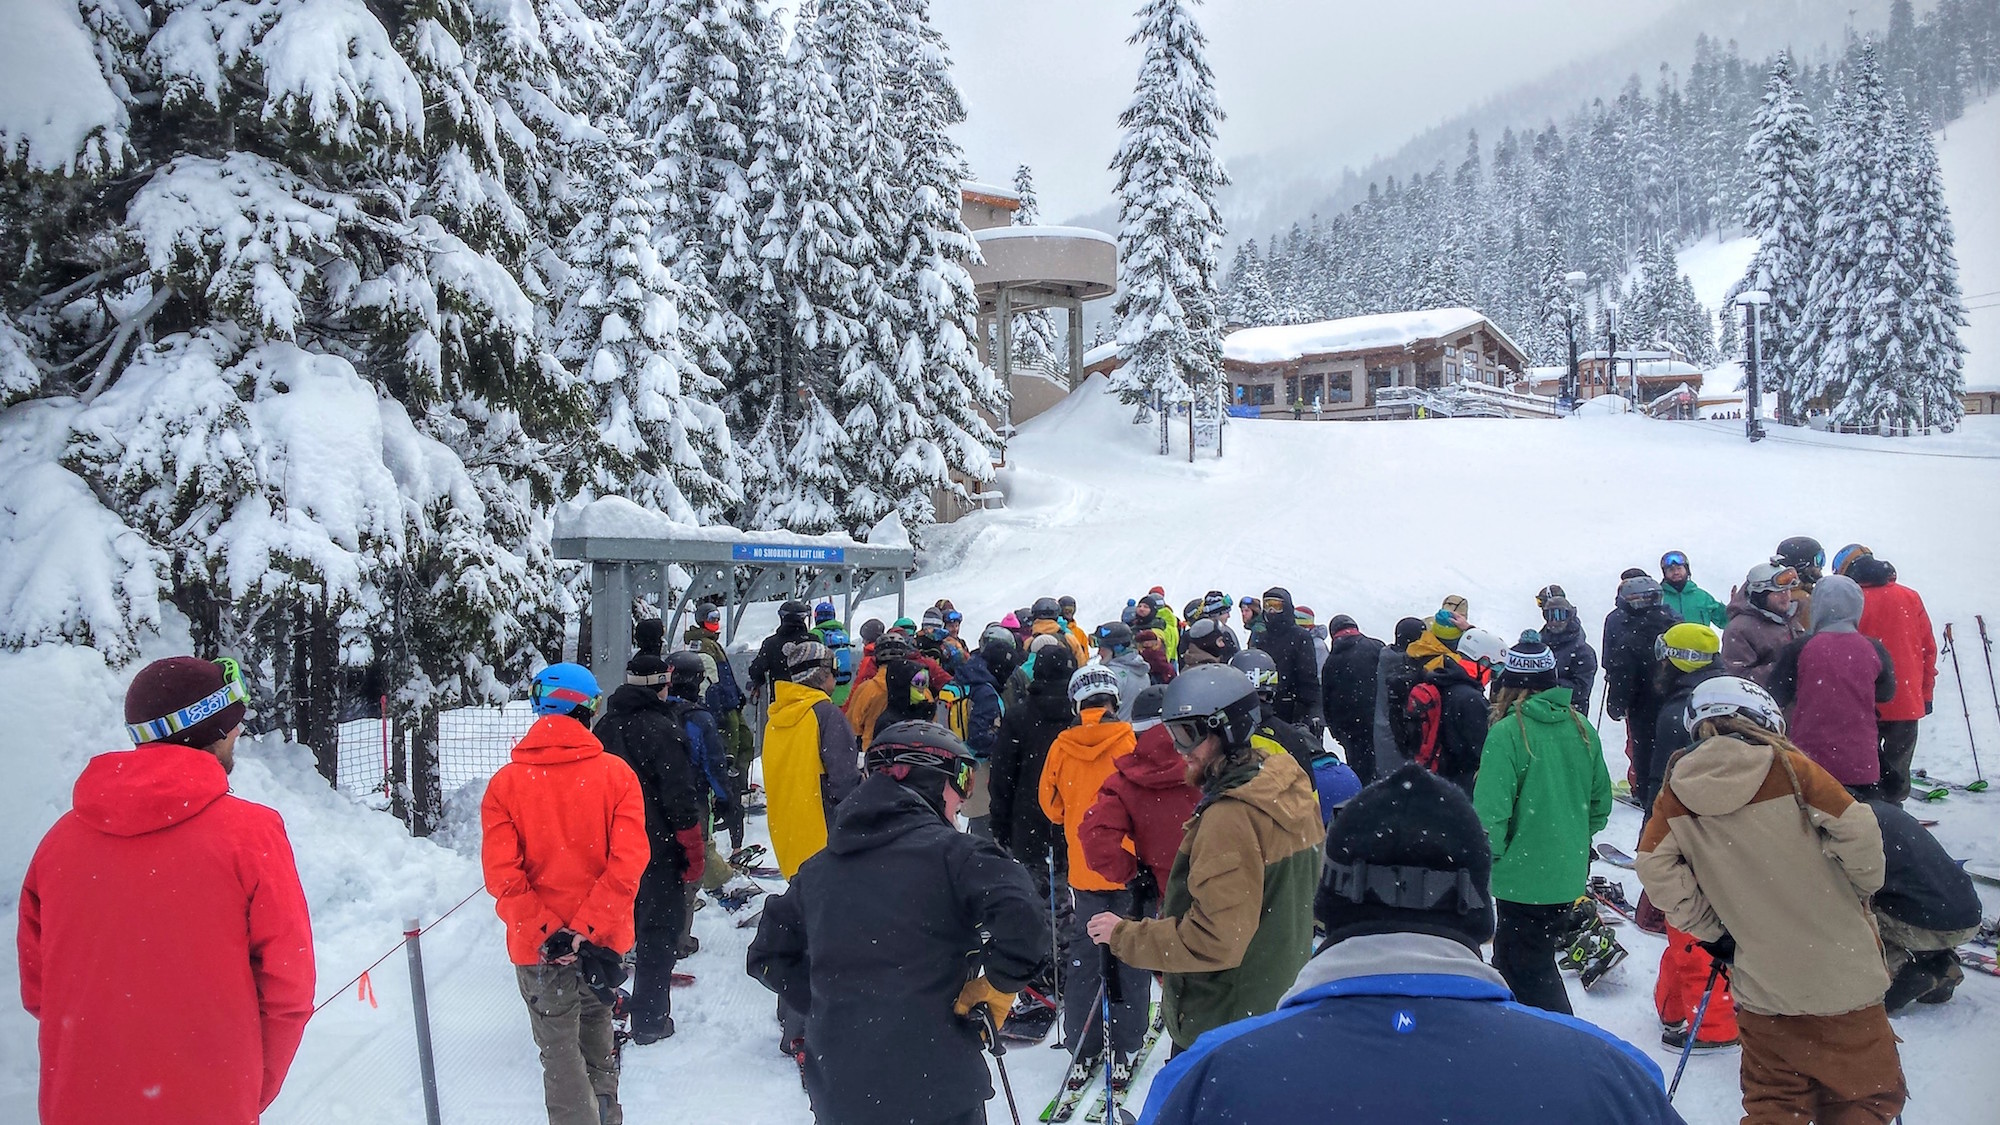 A crowd of skiers and snowboarders at Stevens Pass.